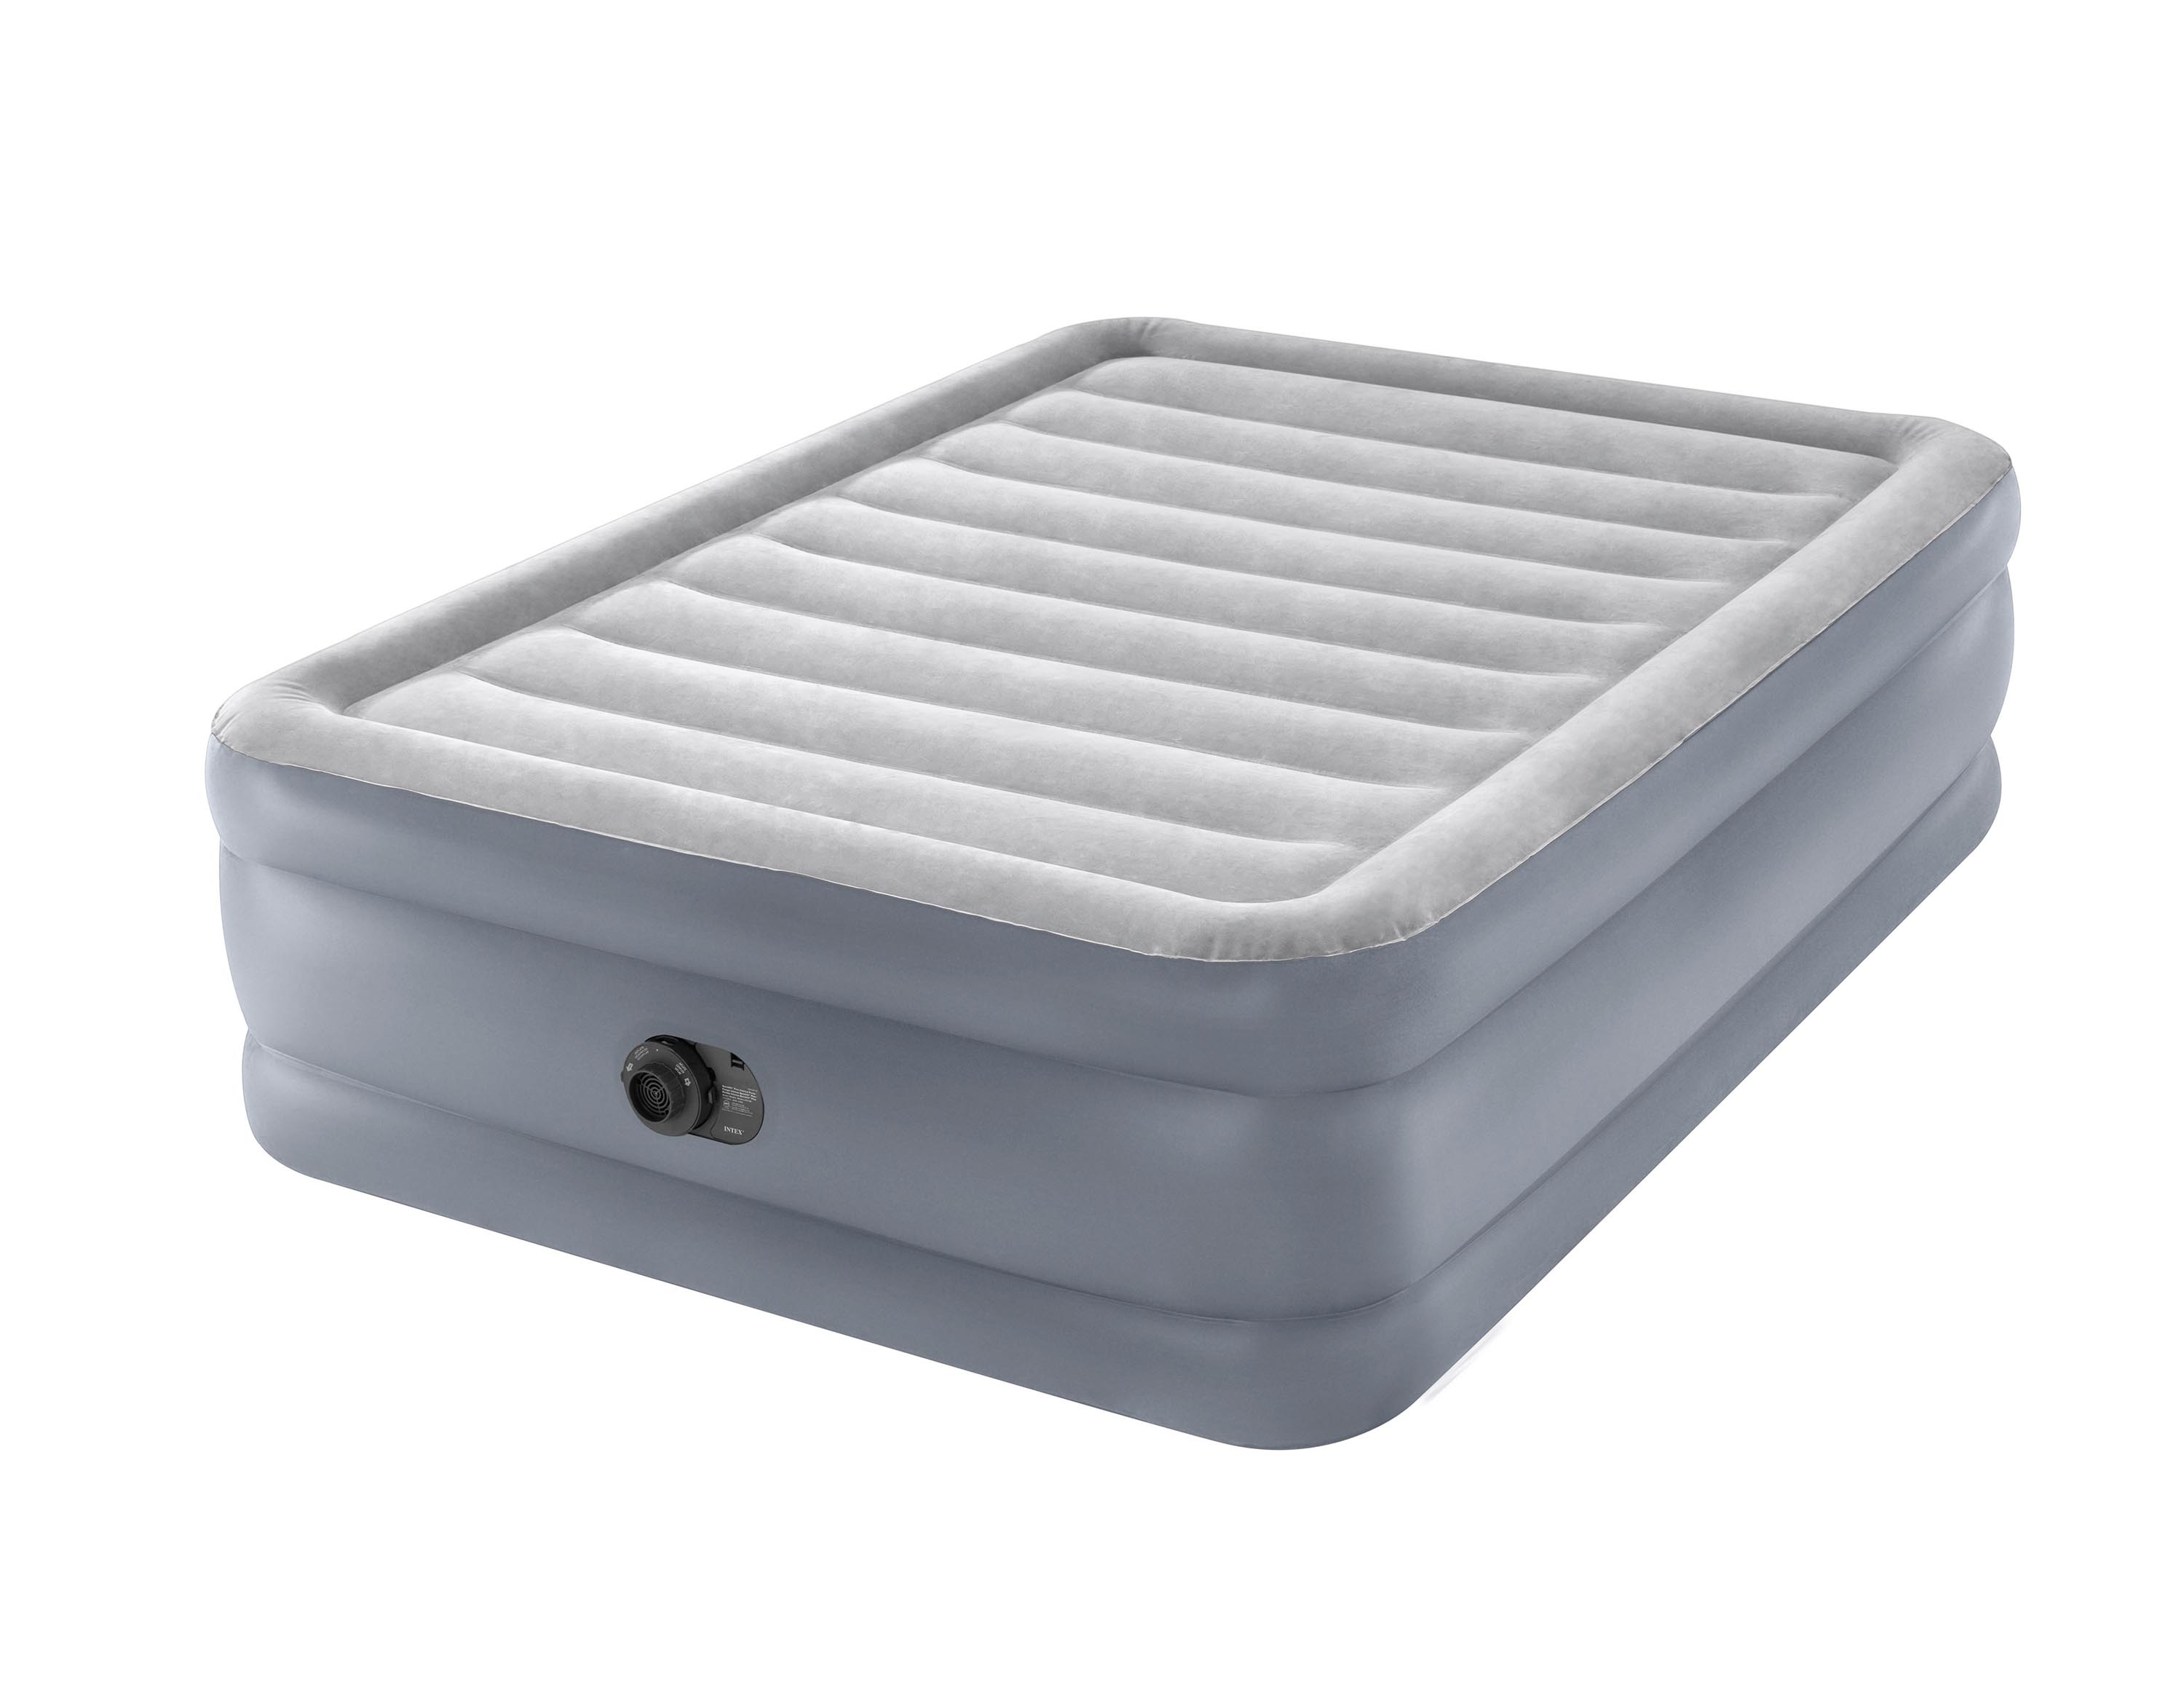 Intex 20" Dura-Beam Deluxe Raised Air Bed Mattress with Internal Pump - Queen - image 1 of 14